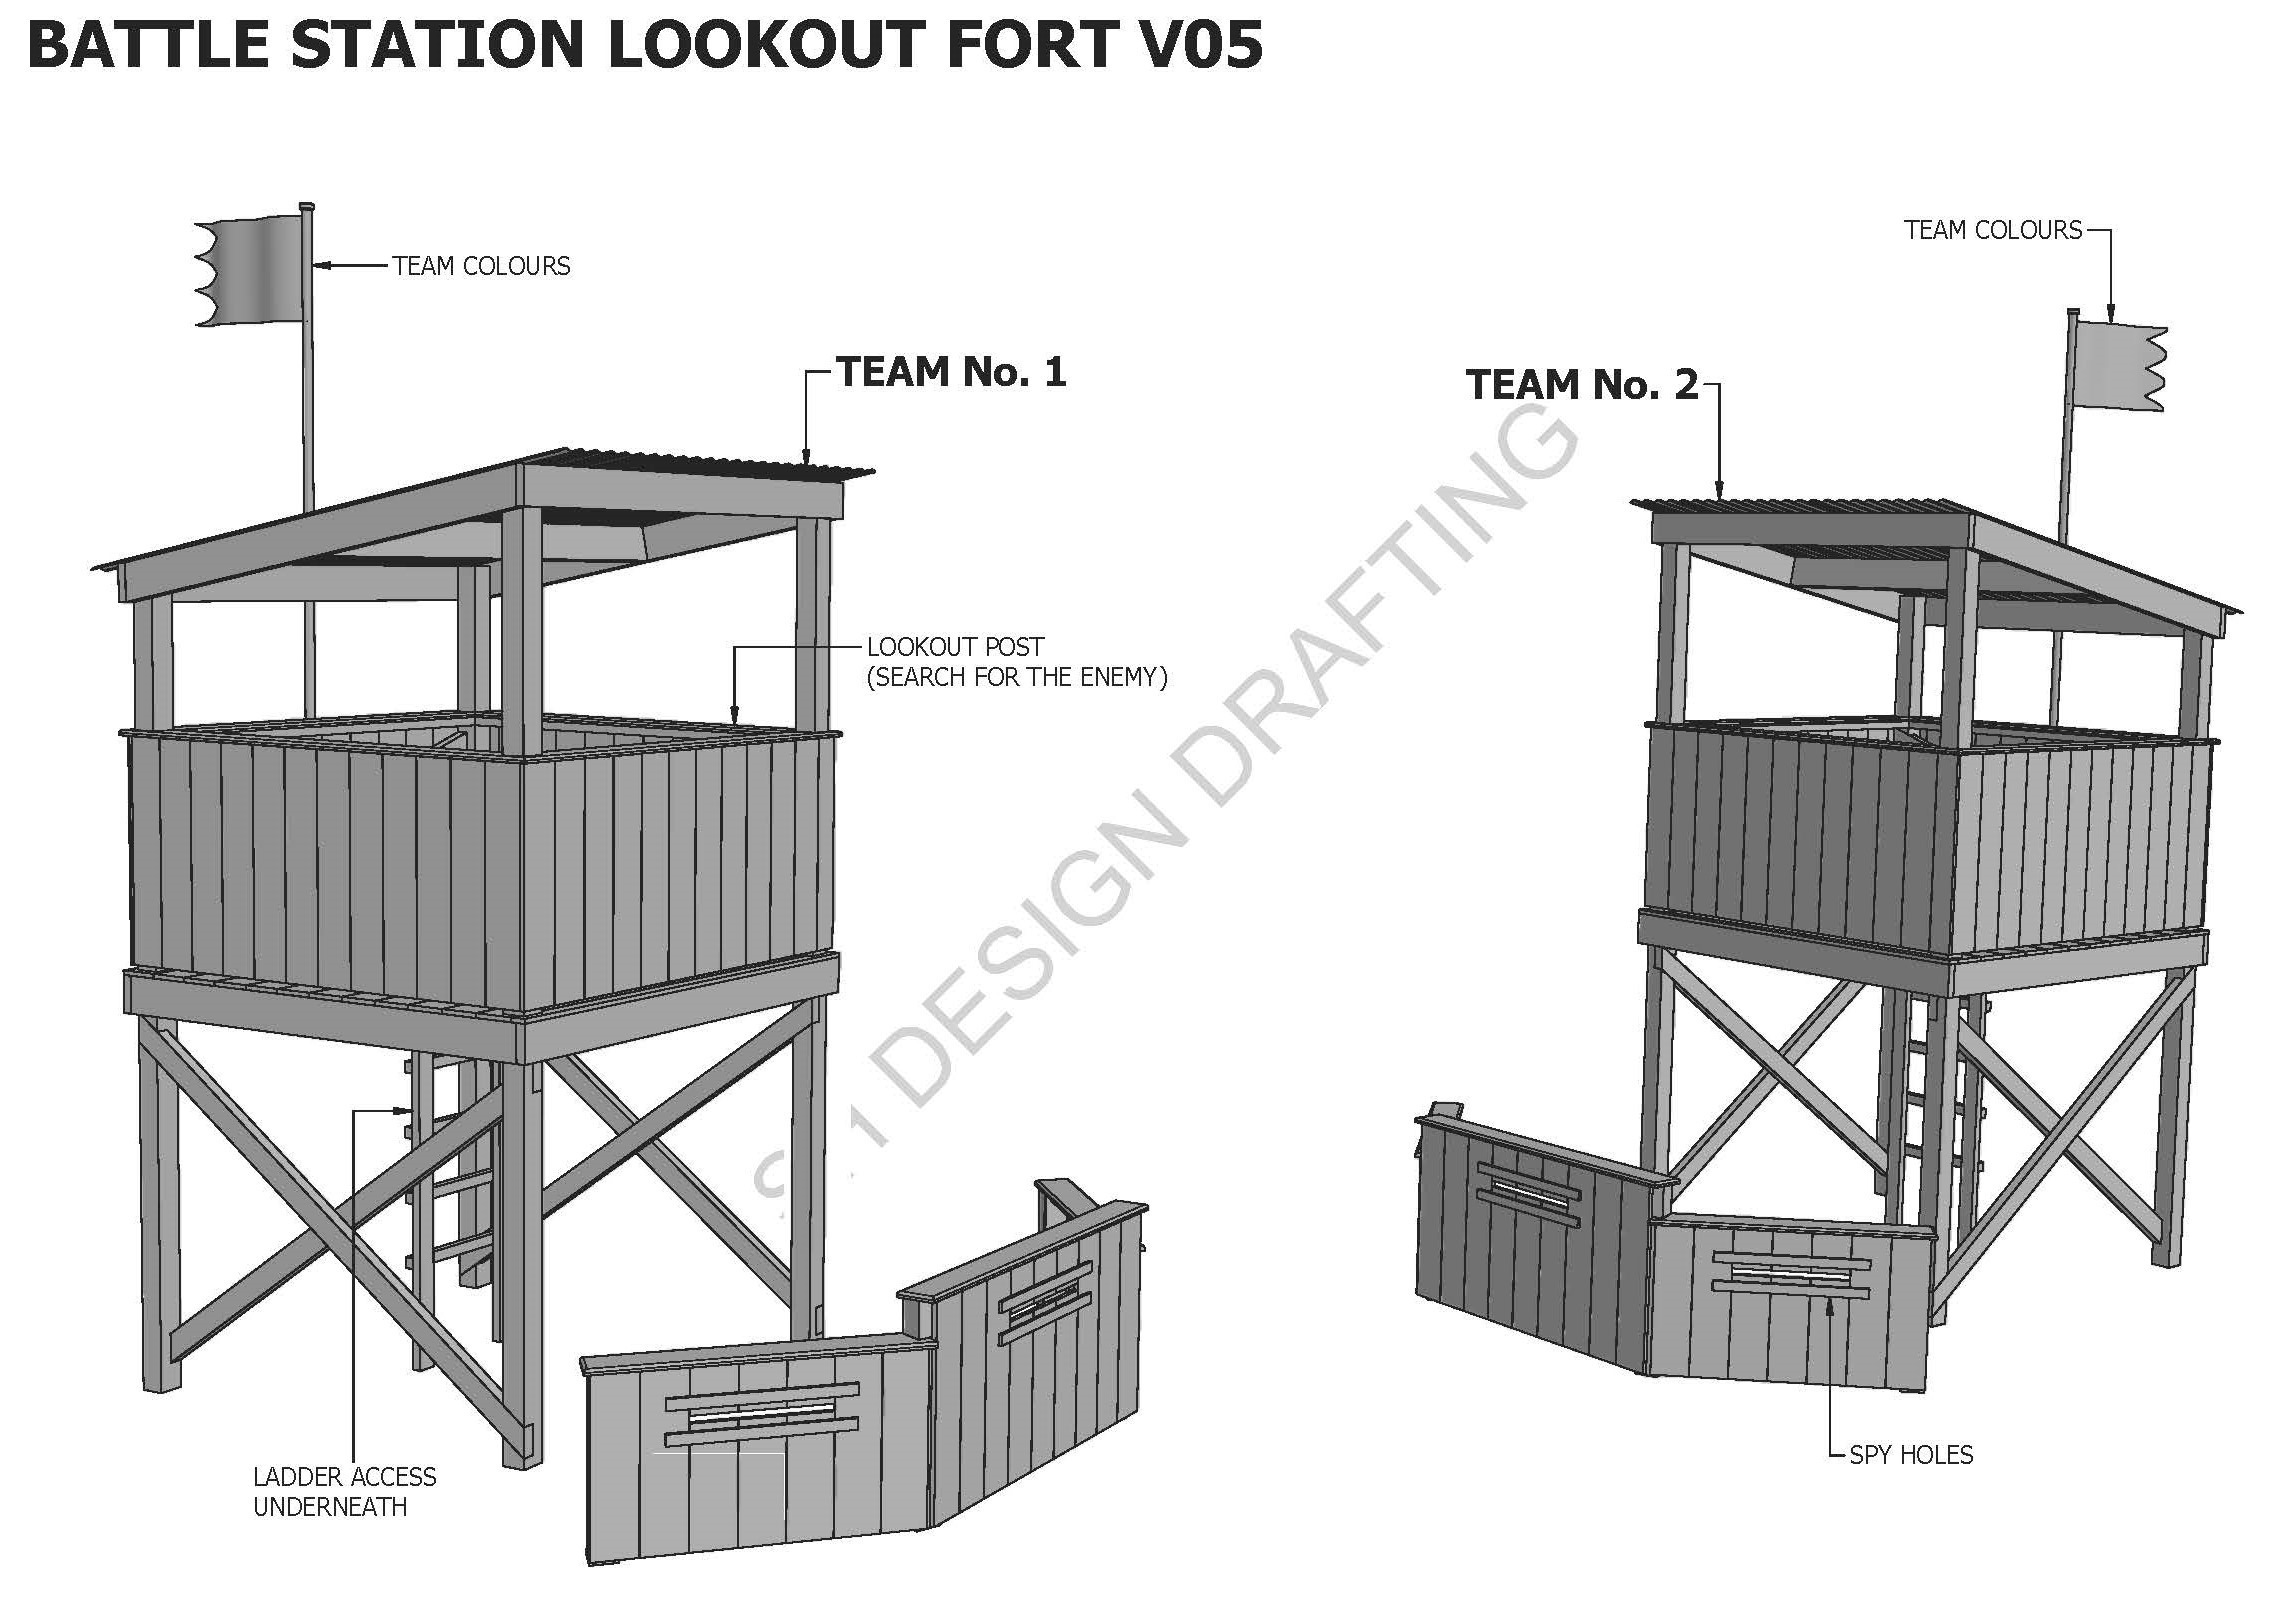 TREE HOUSE CUBBY V05 With Bunker Barricade and Trap Door Entry